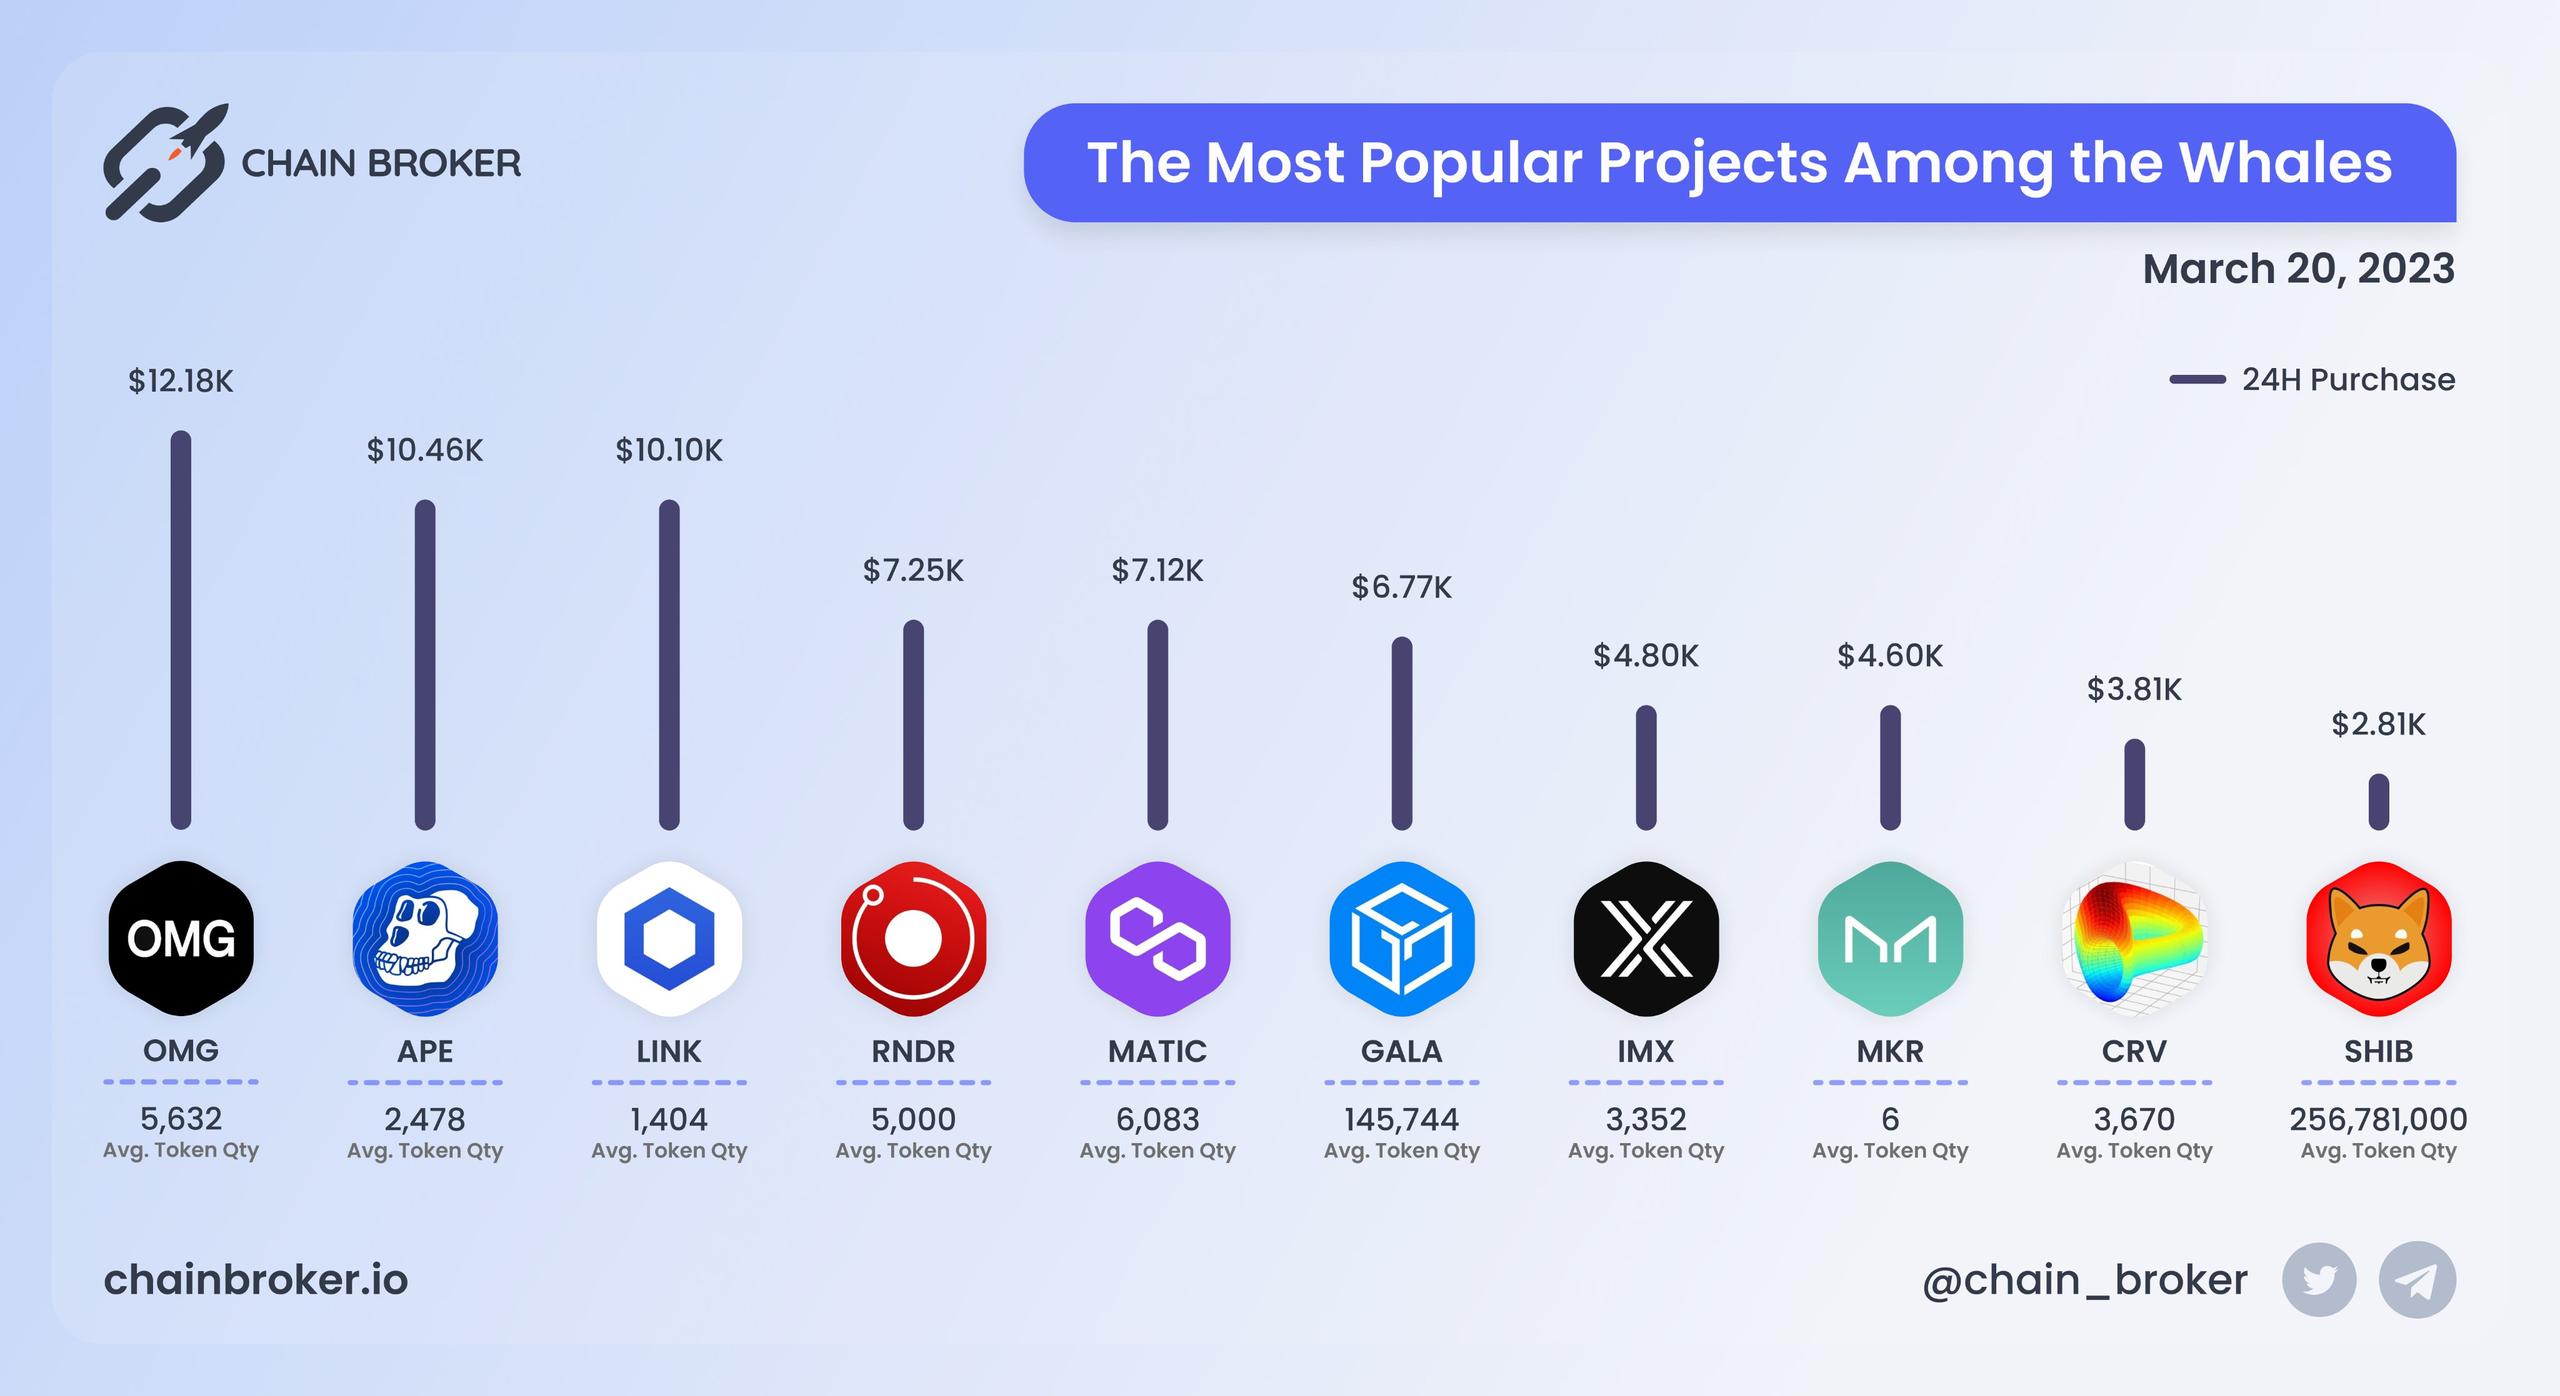 Top popular projects among the whales